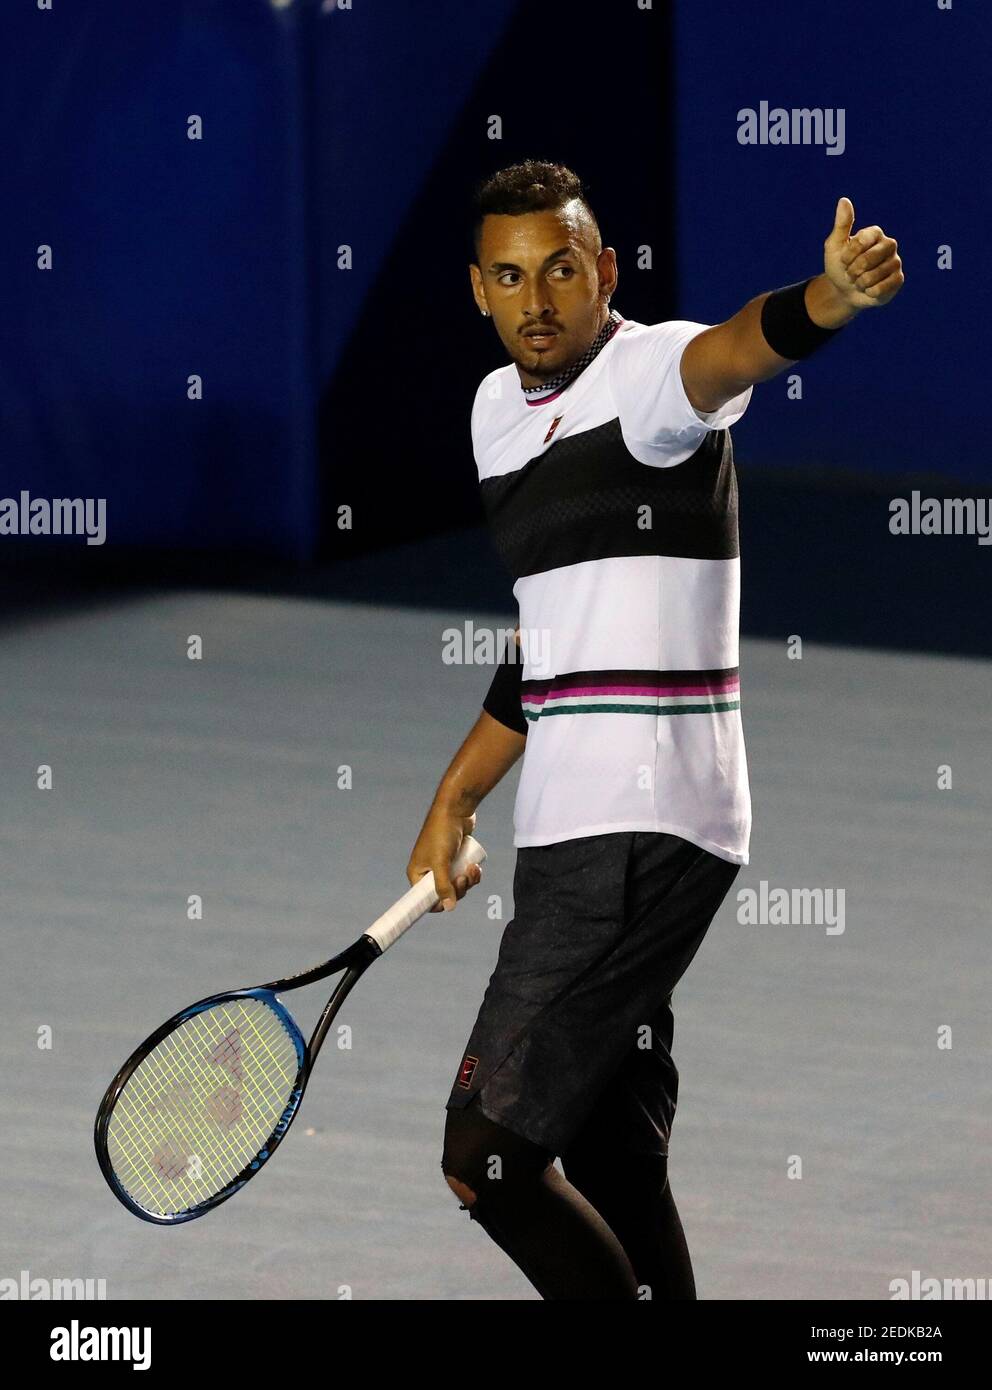 Tennis - ATP 500 - Acapulco Open, Acapulco, Mexico - March 2, 2019  Australia's Nick Kyrgios reacts during his semi final match against John  Isner of the U.S. REUTERS/Henry Romero Stock Photo - Alamy